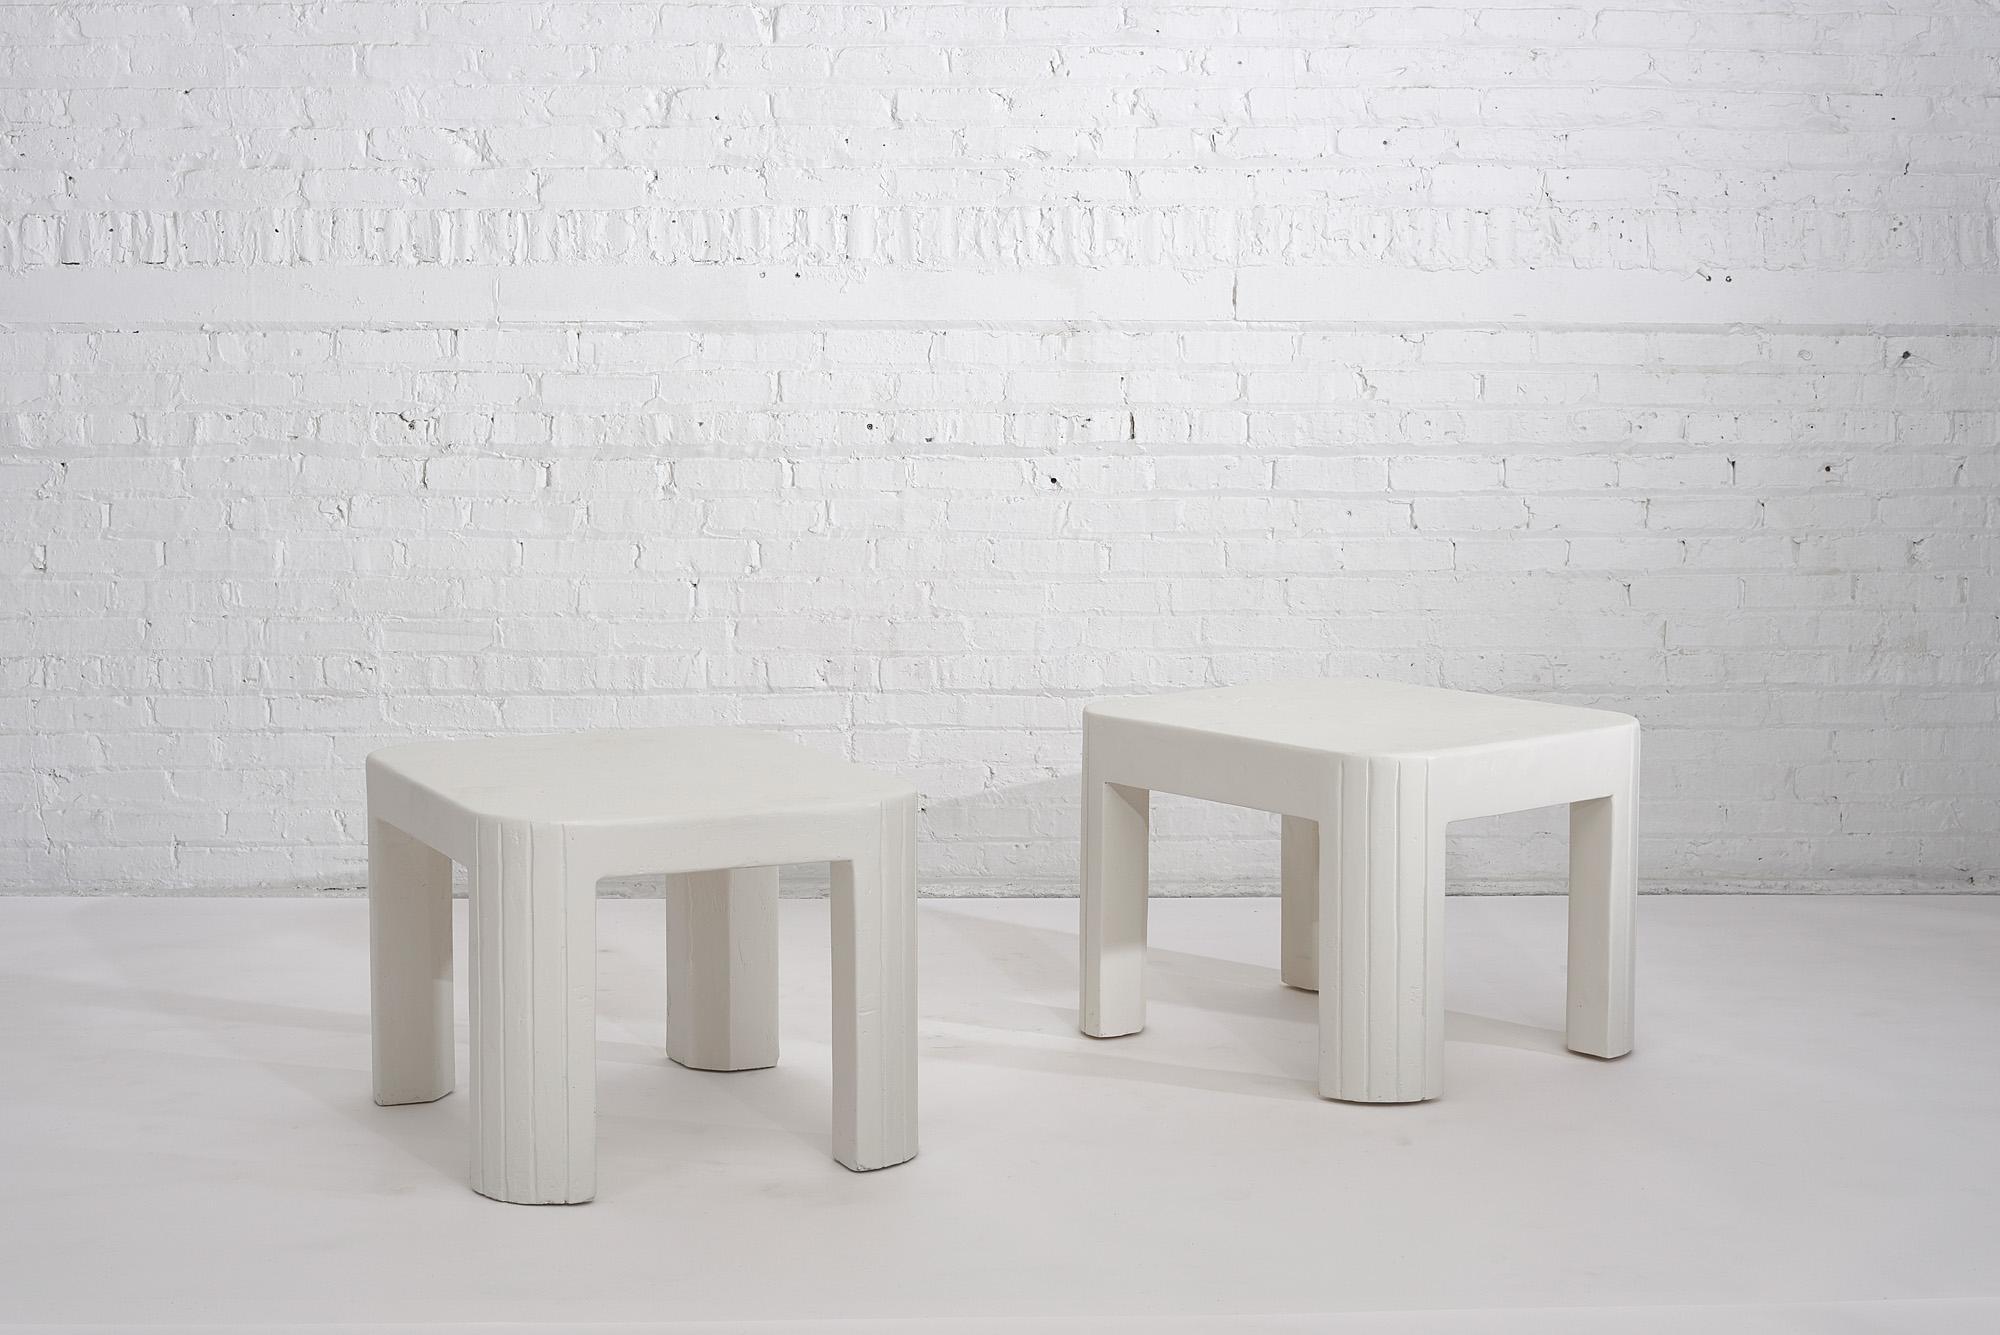 Pair of plaster postmodern end tables, circa 1970s. Great design with rounded edges, lined detailing on the legs.